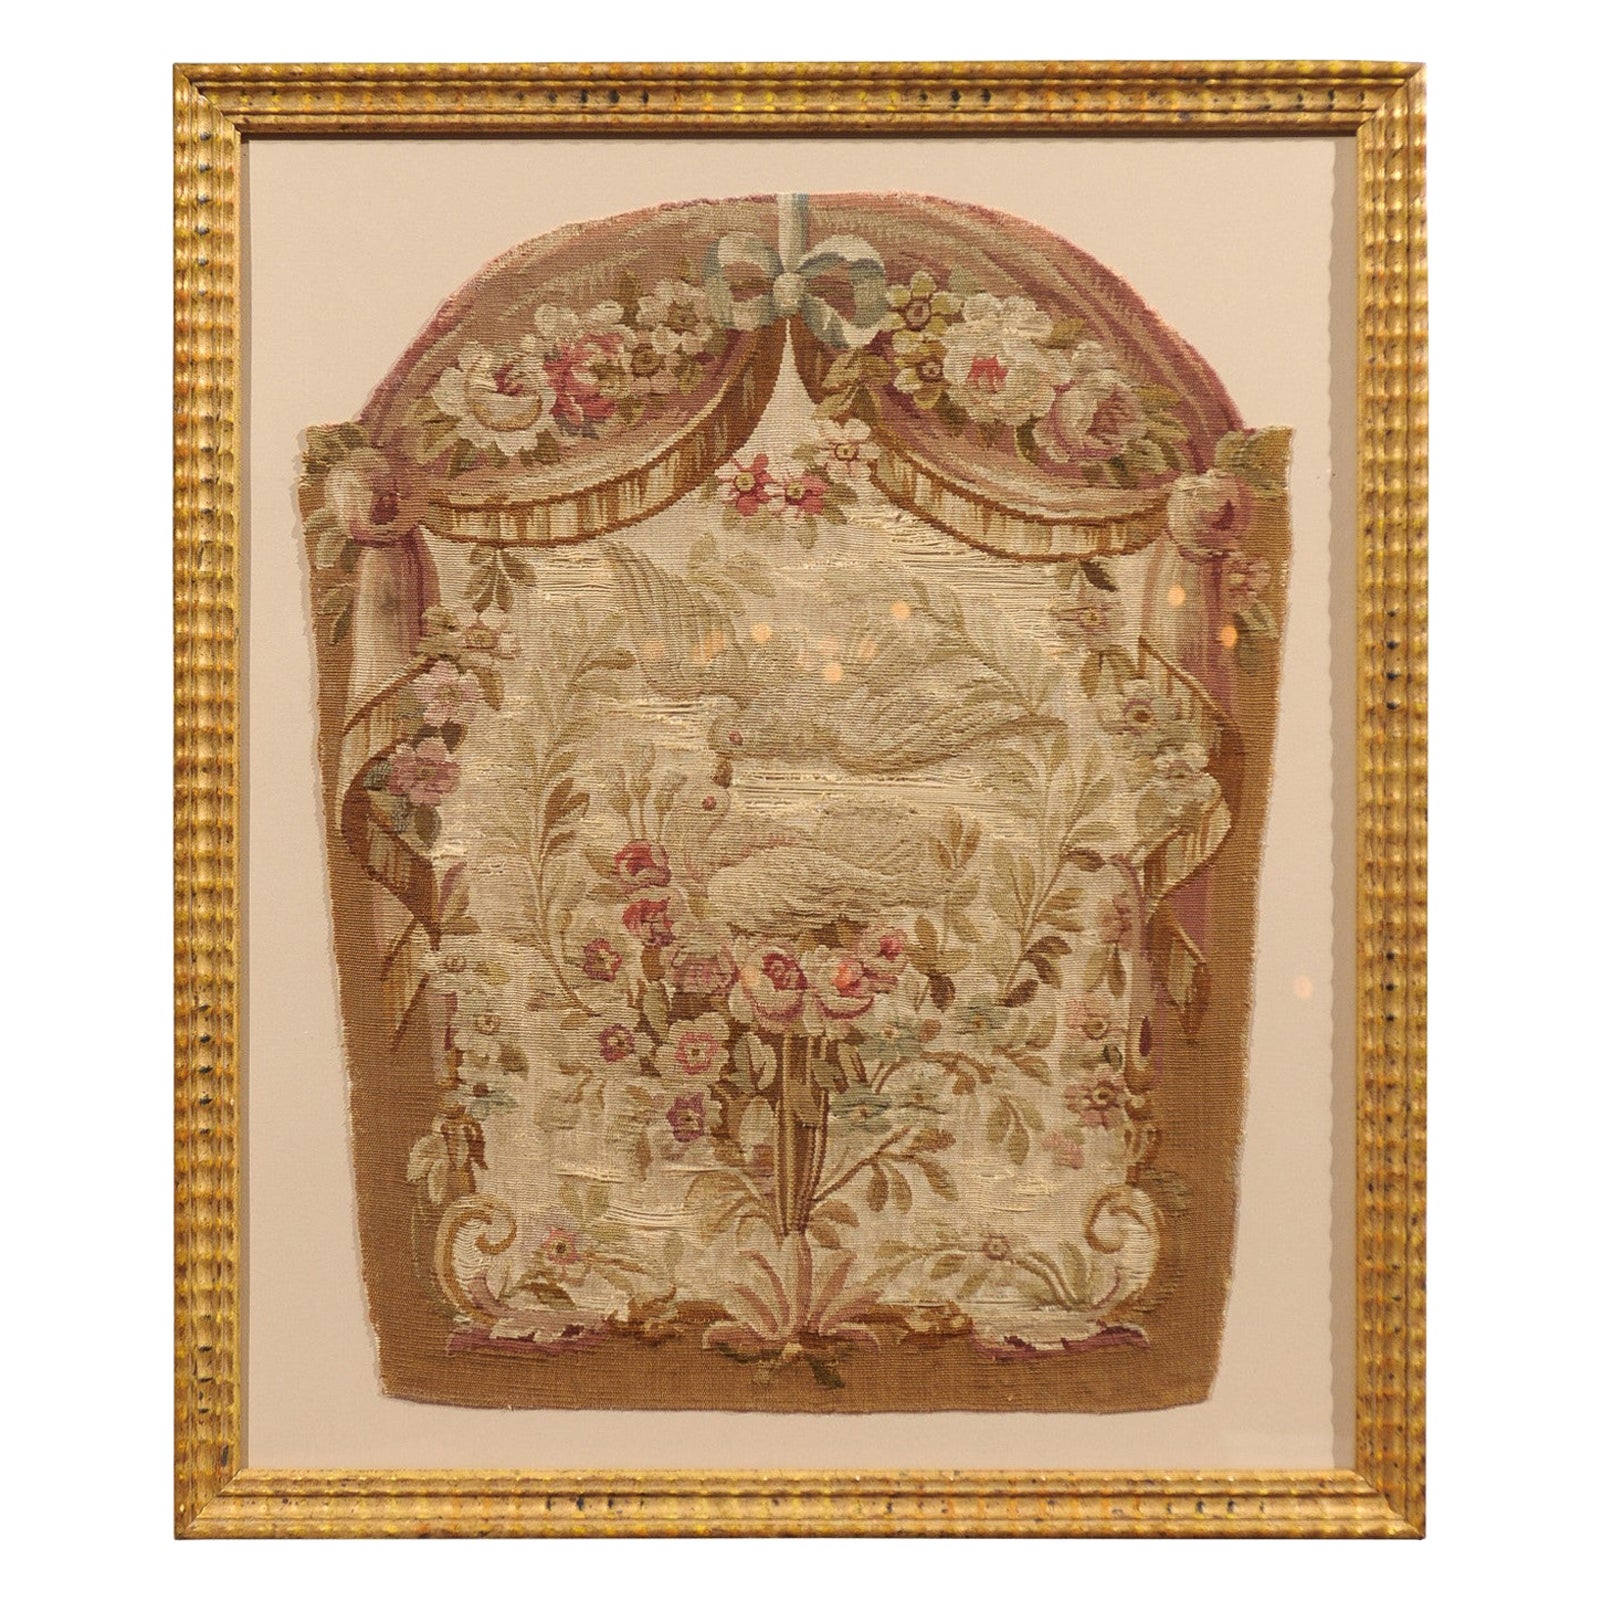 Giltwood Framed 19th Century French Tapestry Fragment with Kissing Doves